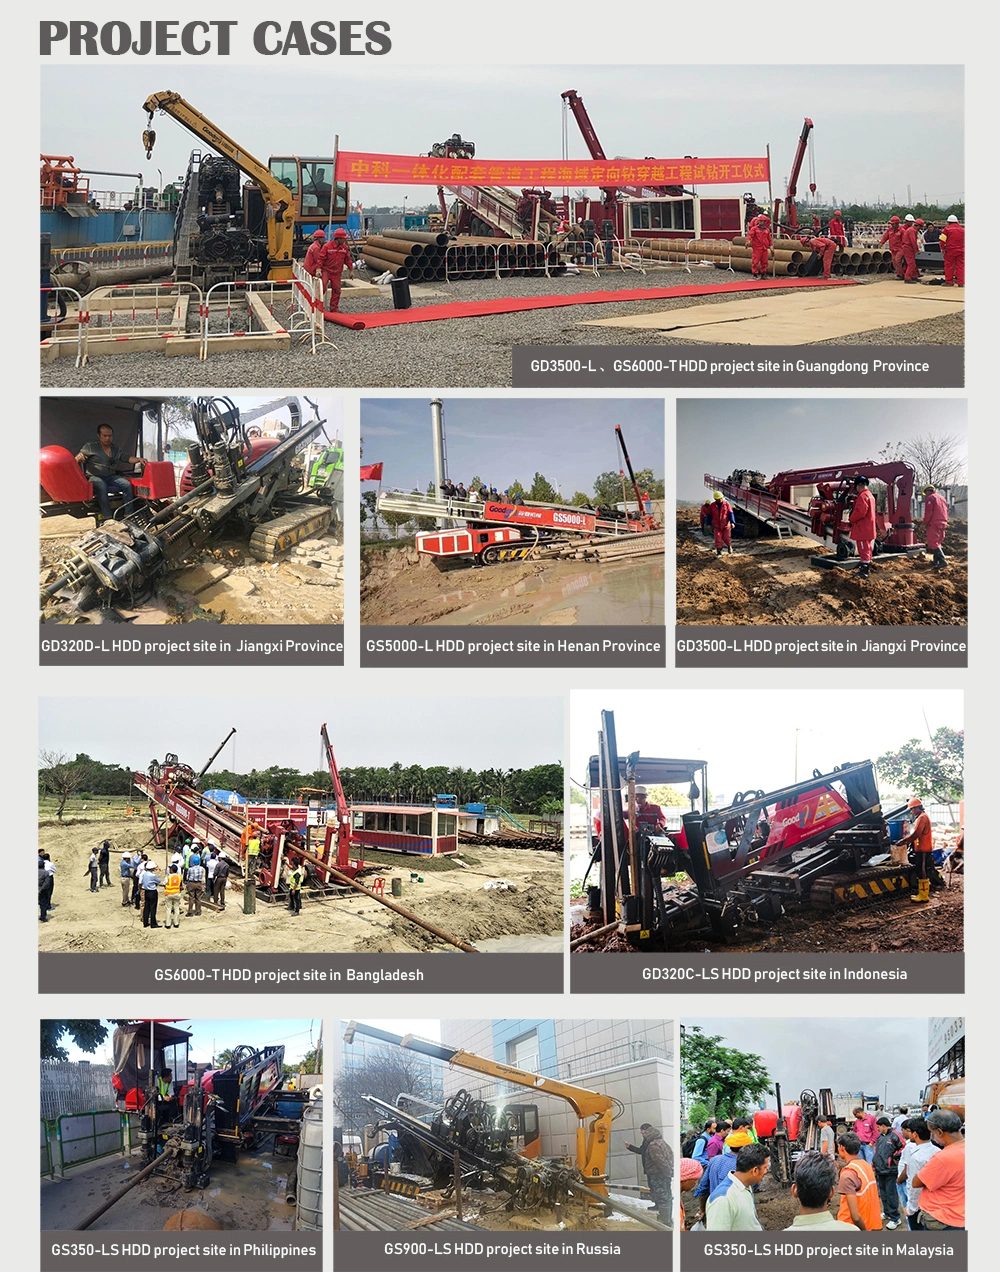 38T(A) Goodeng HDD rig horizontal directional drilling machine